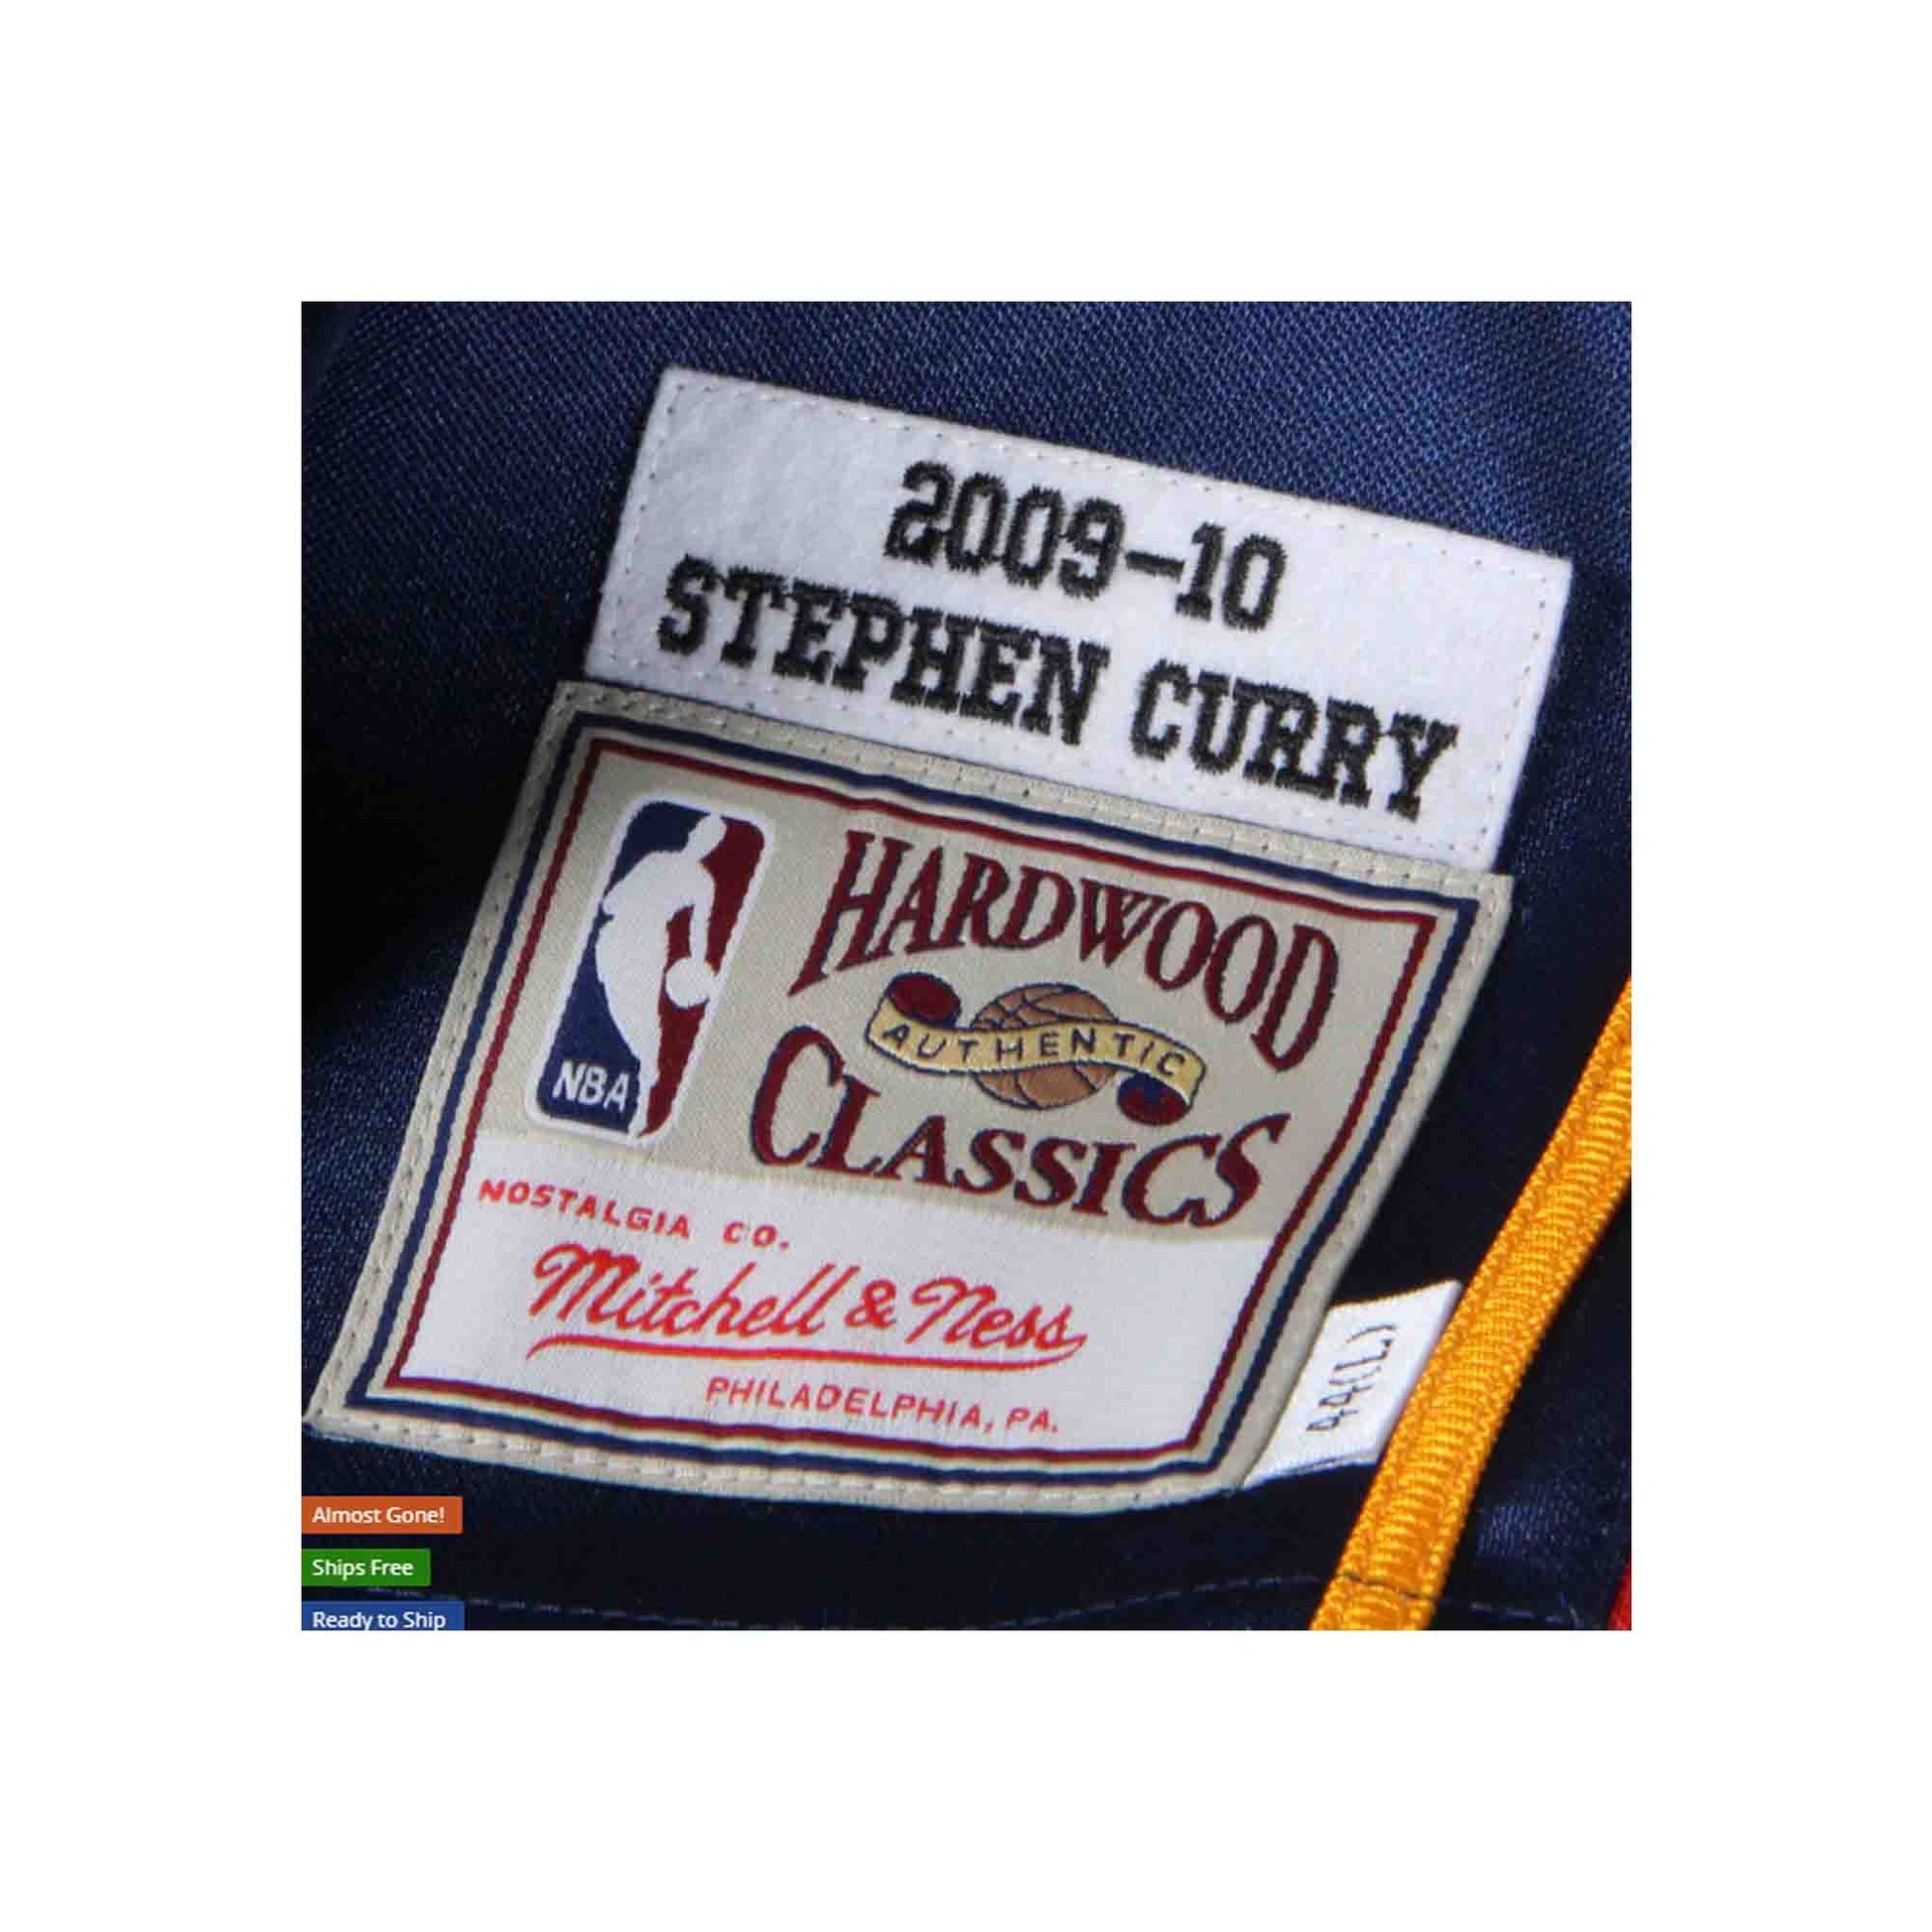 Stephen Curry Golden State Warriors Mitchell & Ness 2009-10 Hardwood Classics Authentic Player Jersey - White